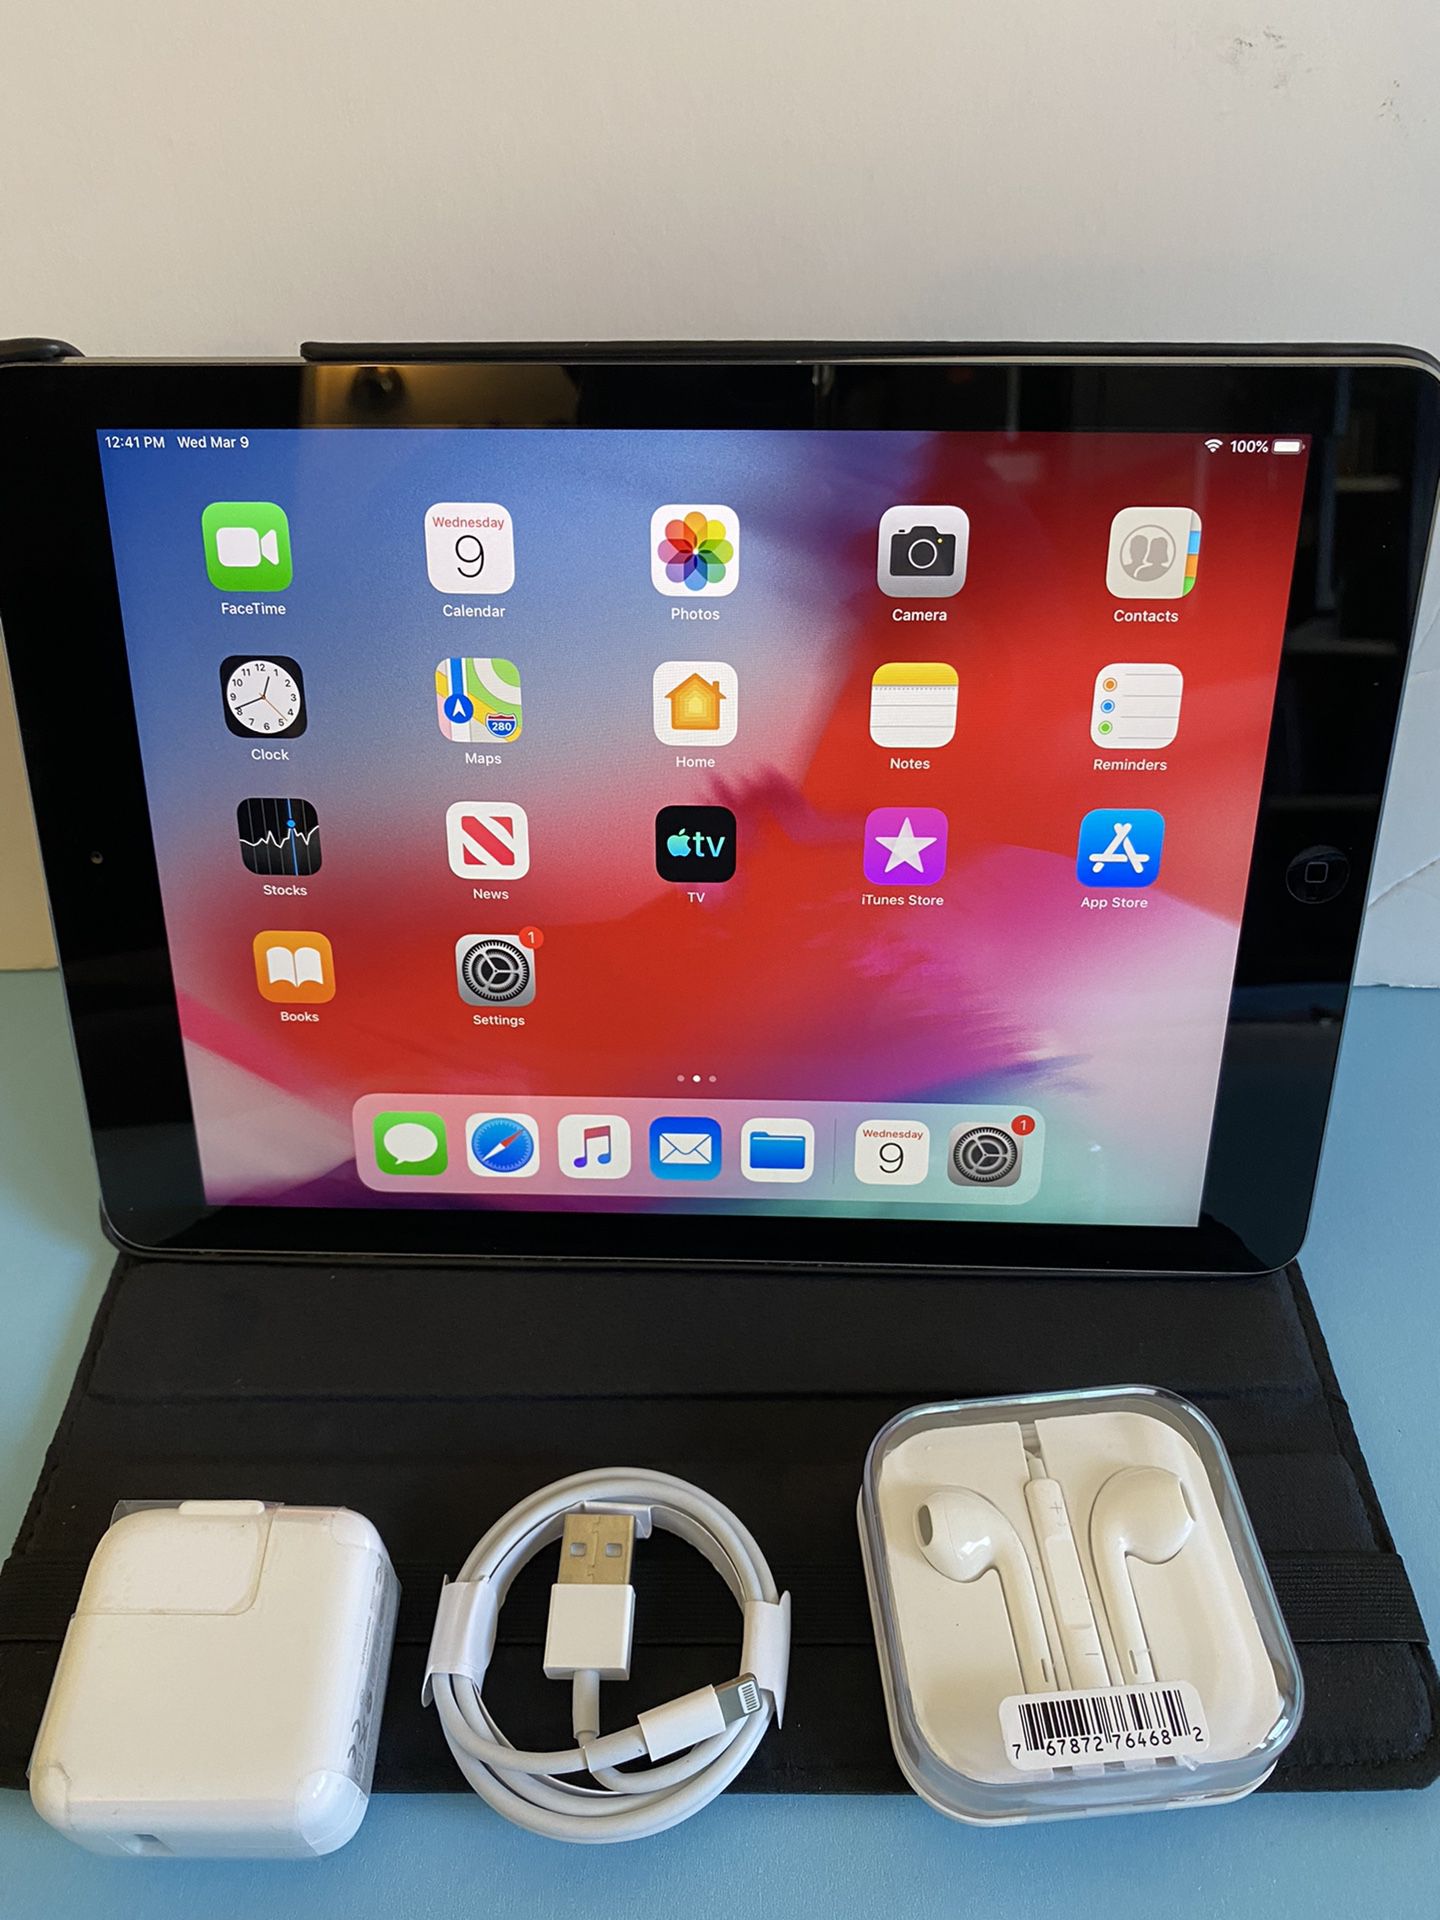 Apple IPad Air (9.7” Retina Display/ IOS 12 / Newer Than Ipad 4th Gen.) 16GB complete (Roblox/ Disney+ supported//32GB $169) for Sale in El Monte, CA - OfferUp